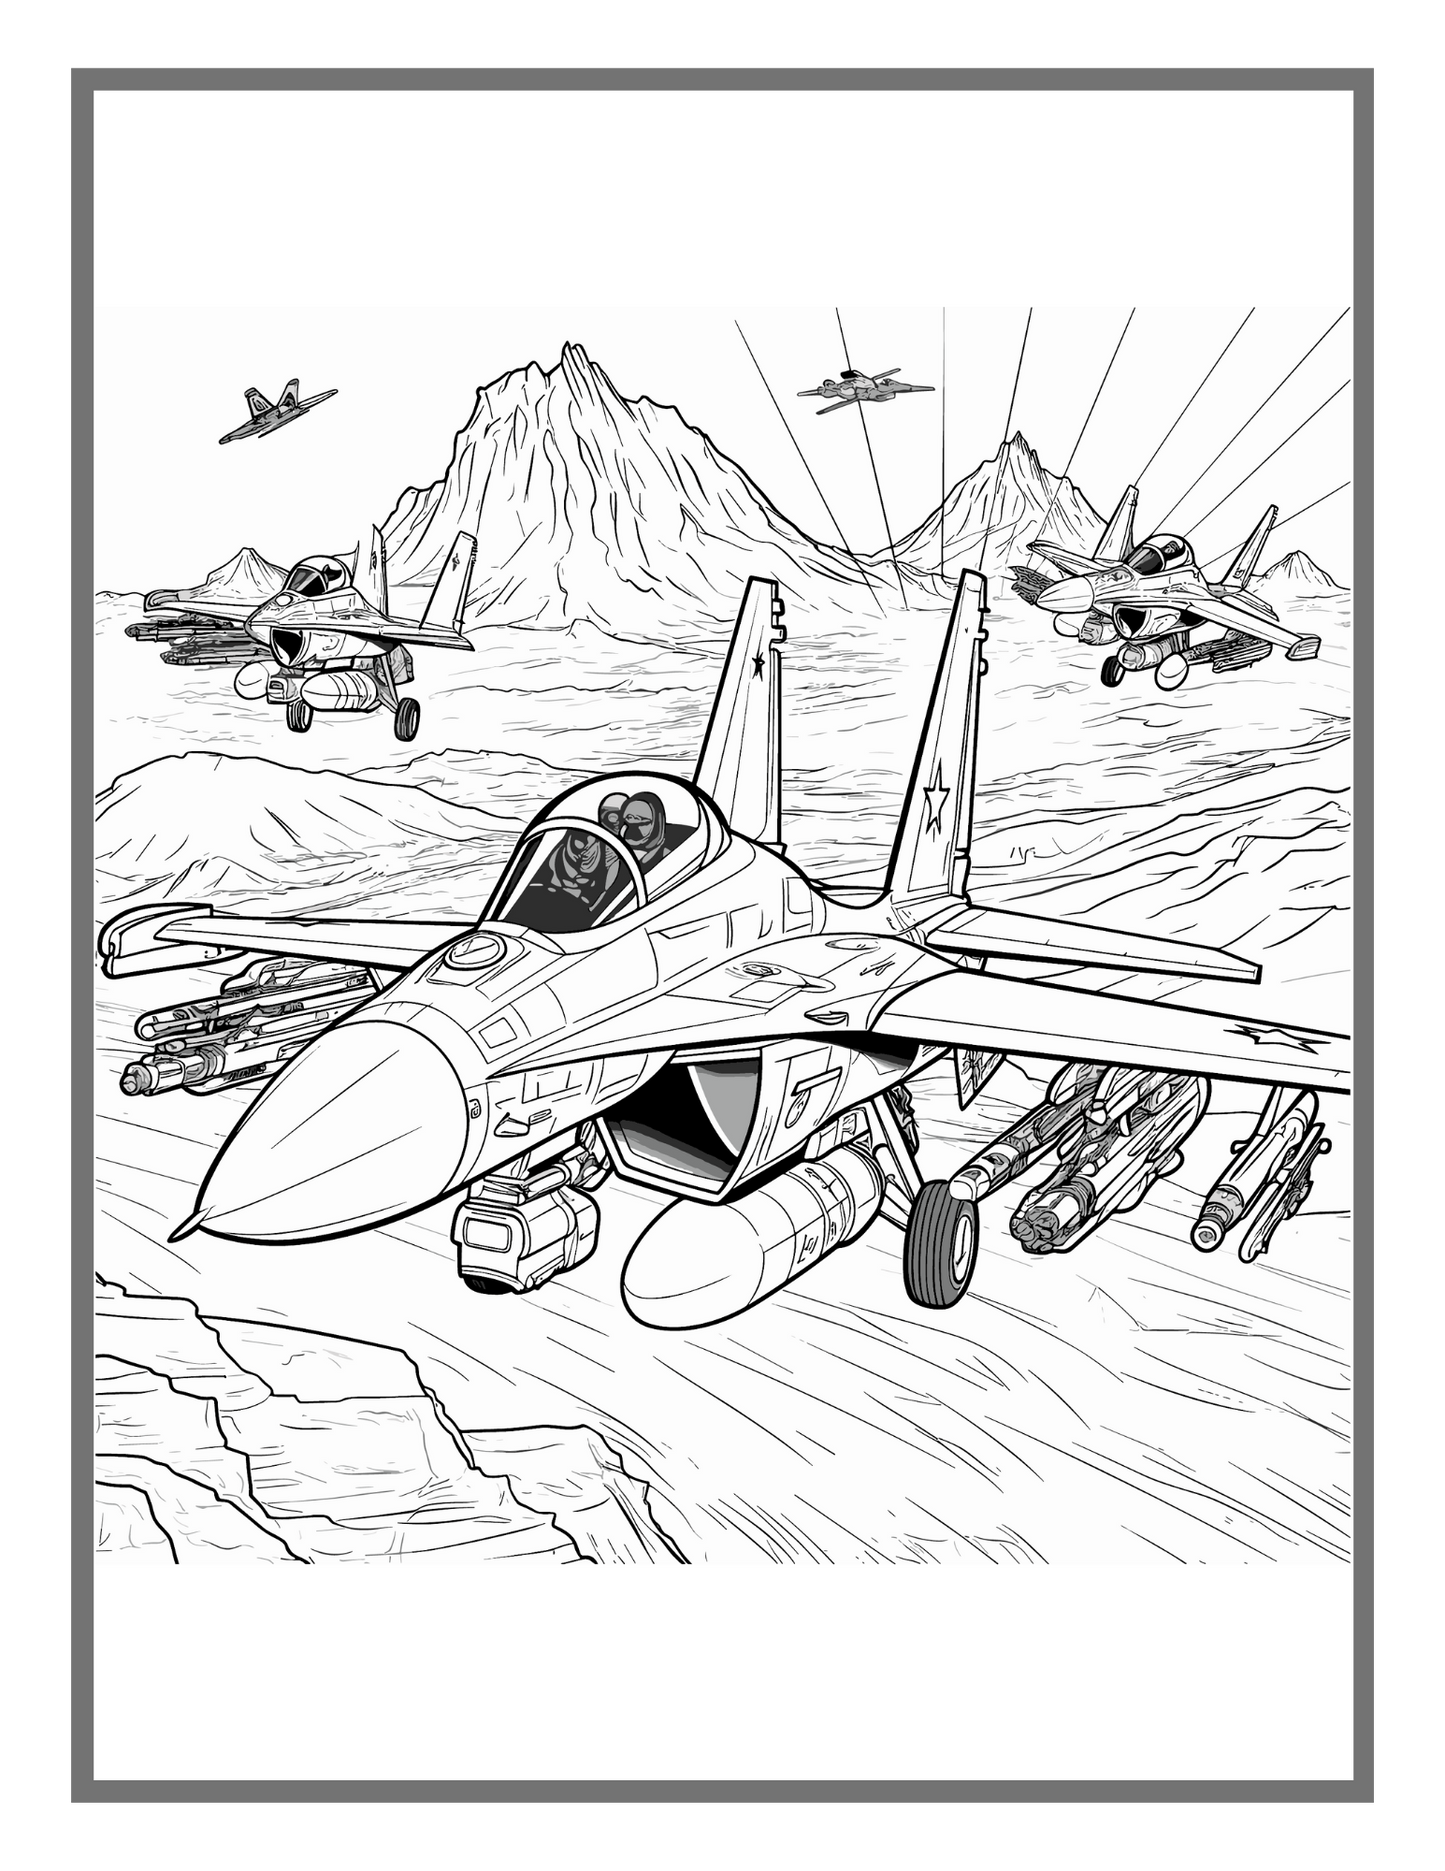 Military Army Soldier Coloring Book For Kids Military Coloring Pages Army Coloring Books Boys US Army Coloring Book Army Man Coloring Gift